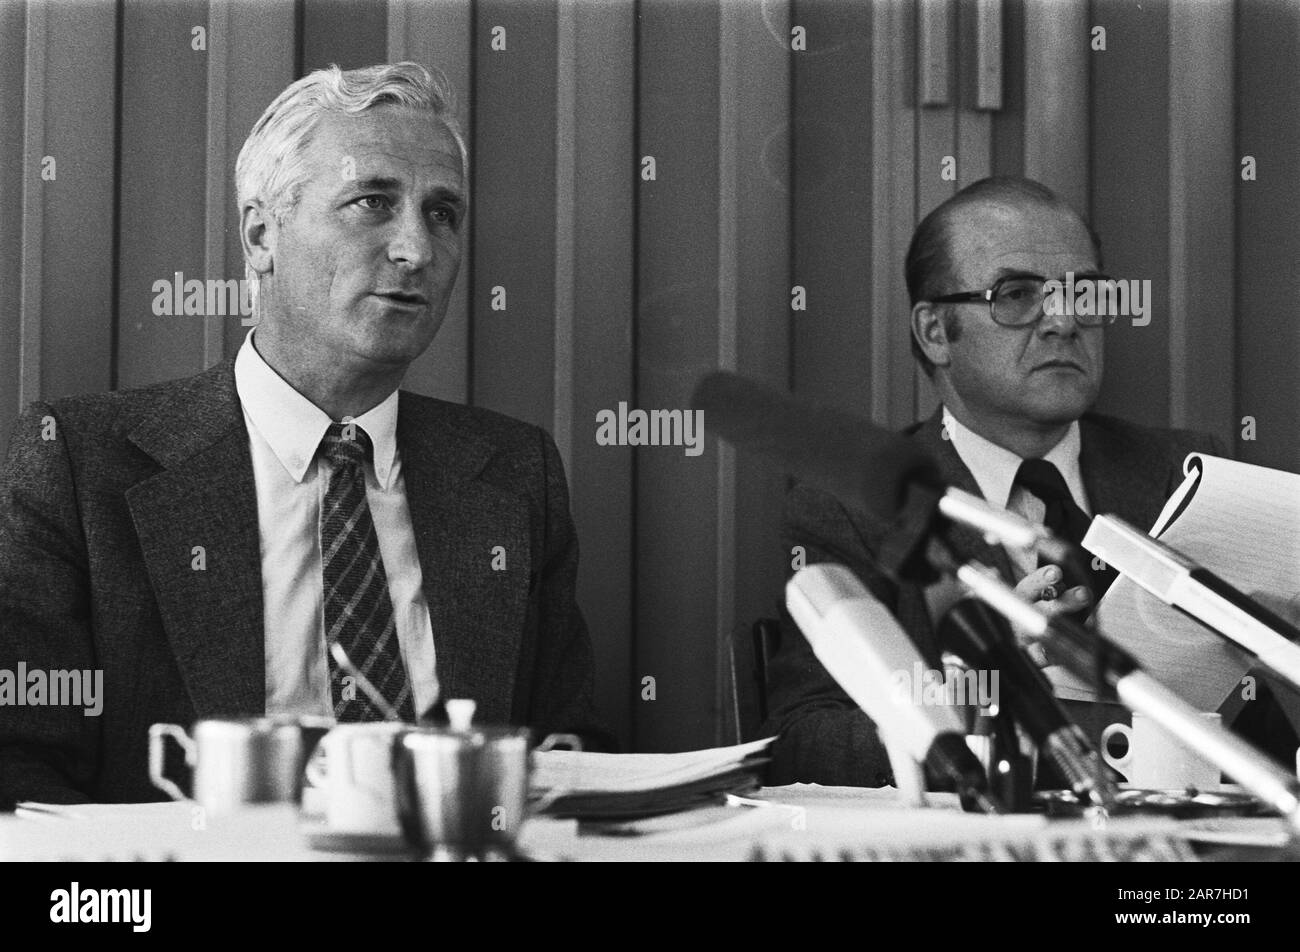 Press conference Hoogovens/Estel in connection with redundancies; director F.E. Mathijsen Gust (l) and O. H. A. van Royen (r) Date: 14 September 1977 Keywords: directors, press conferences Personal name: O. H. A. van Royen Stock Photo